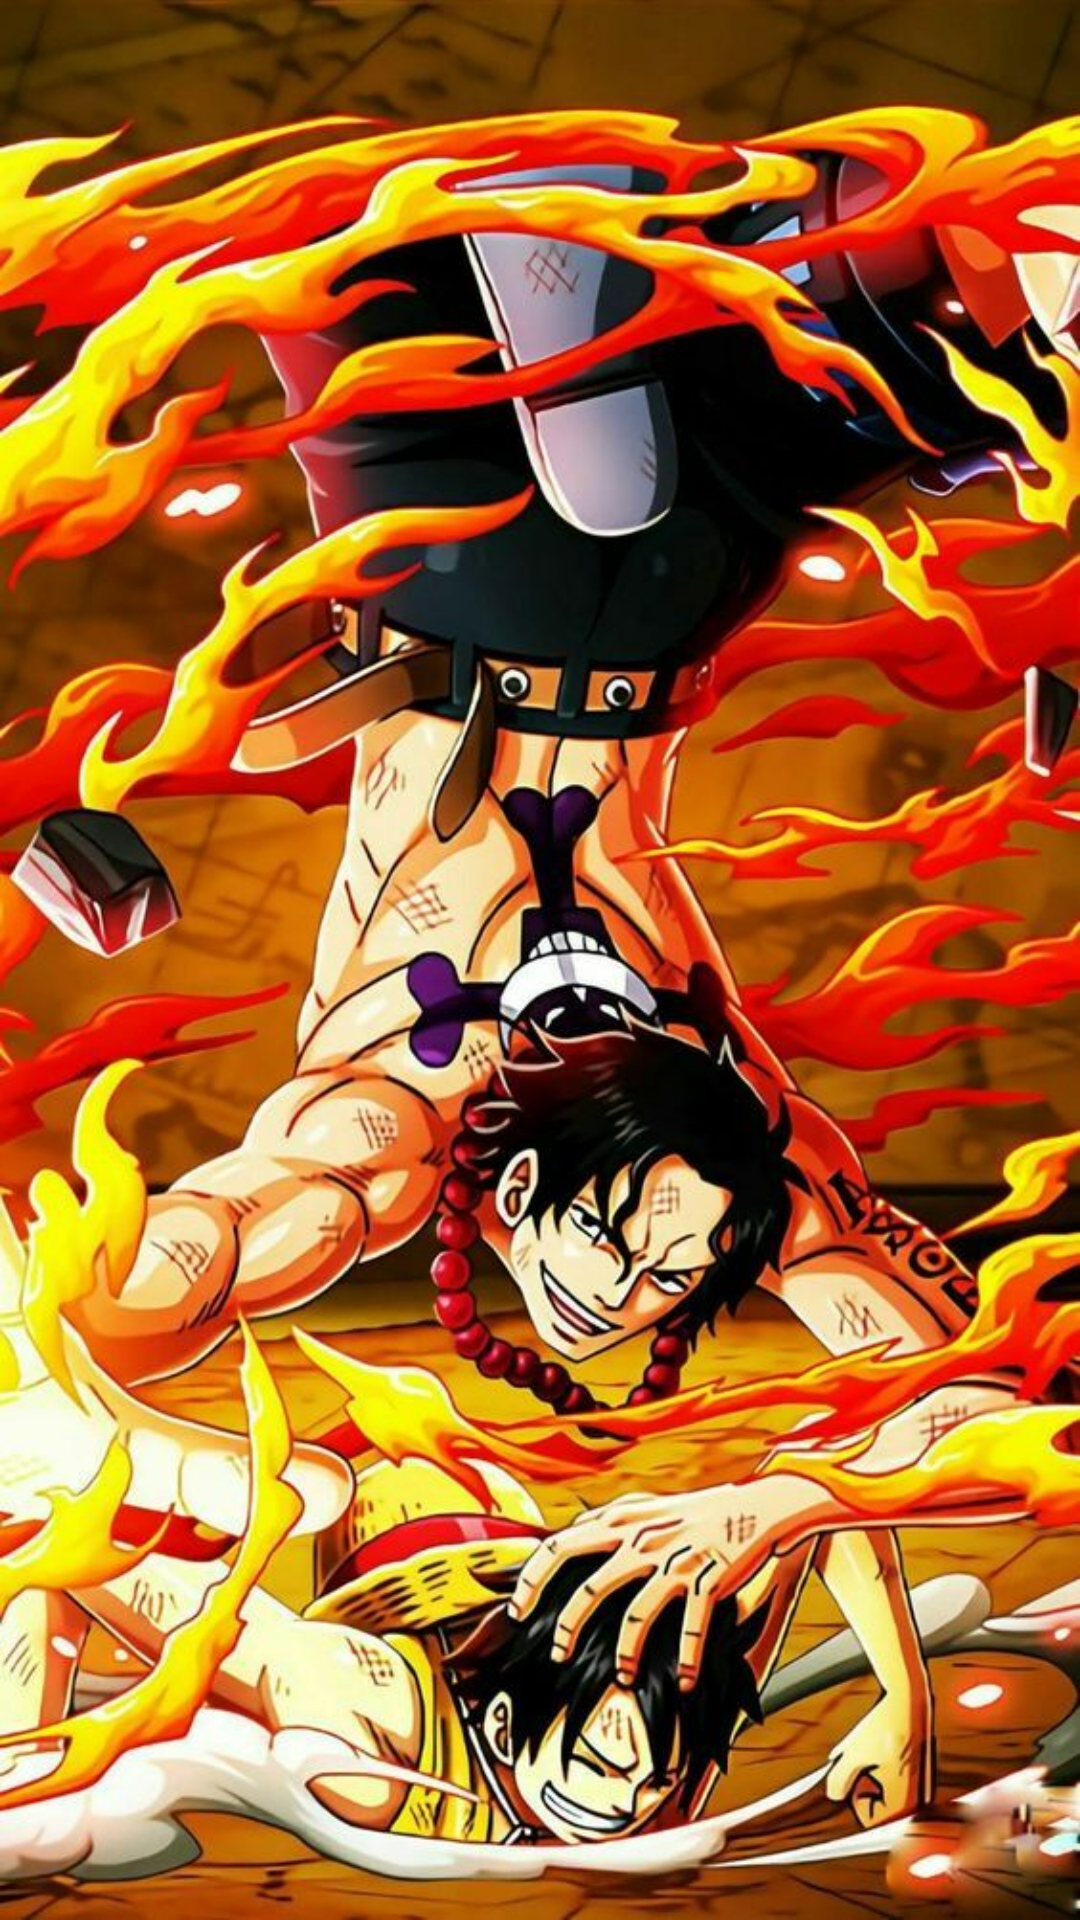 Portgas D. Ace Android Wallpapers